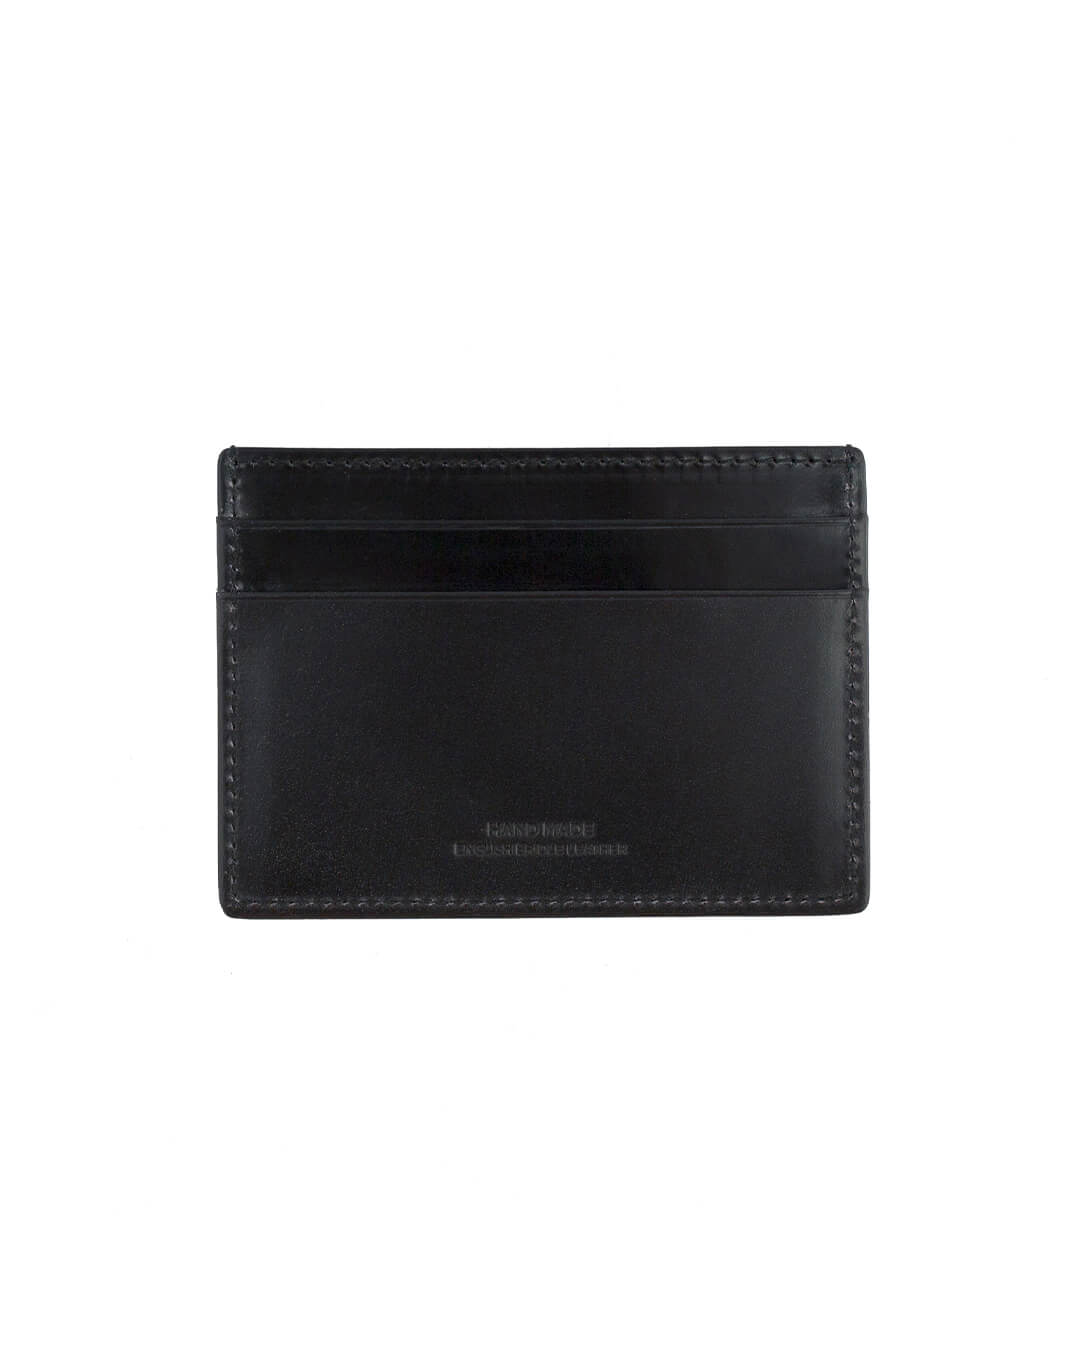 Cavesson&#39;s Wallets Cavesson&#39;s Black Card Case